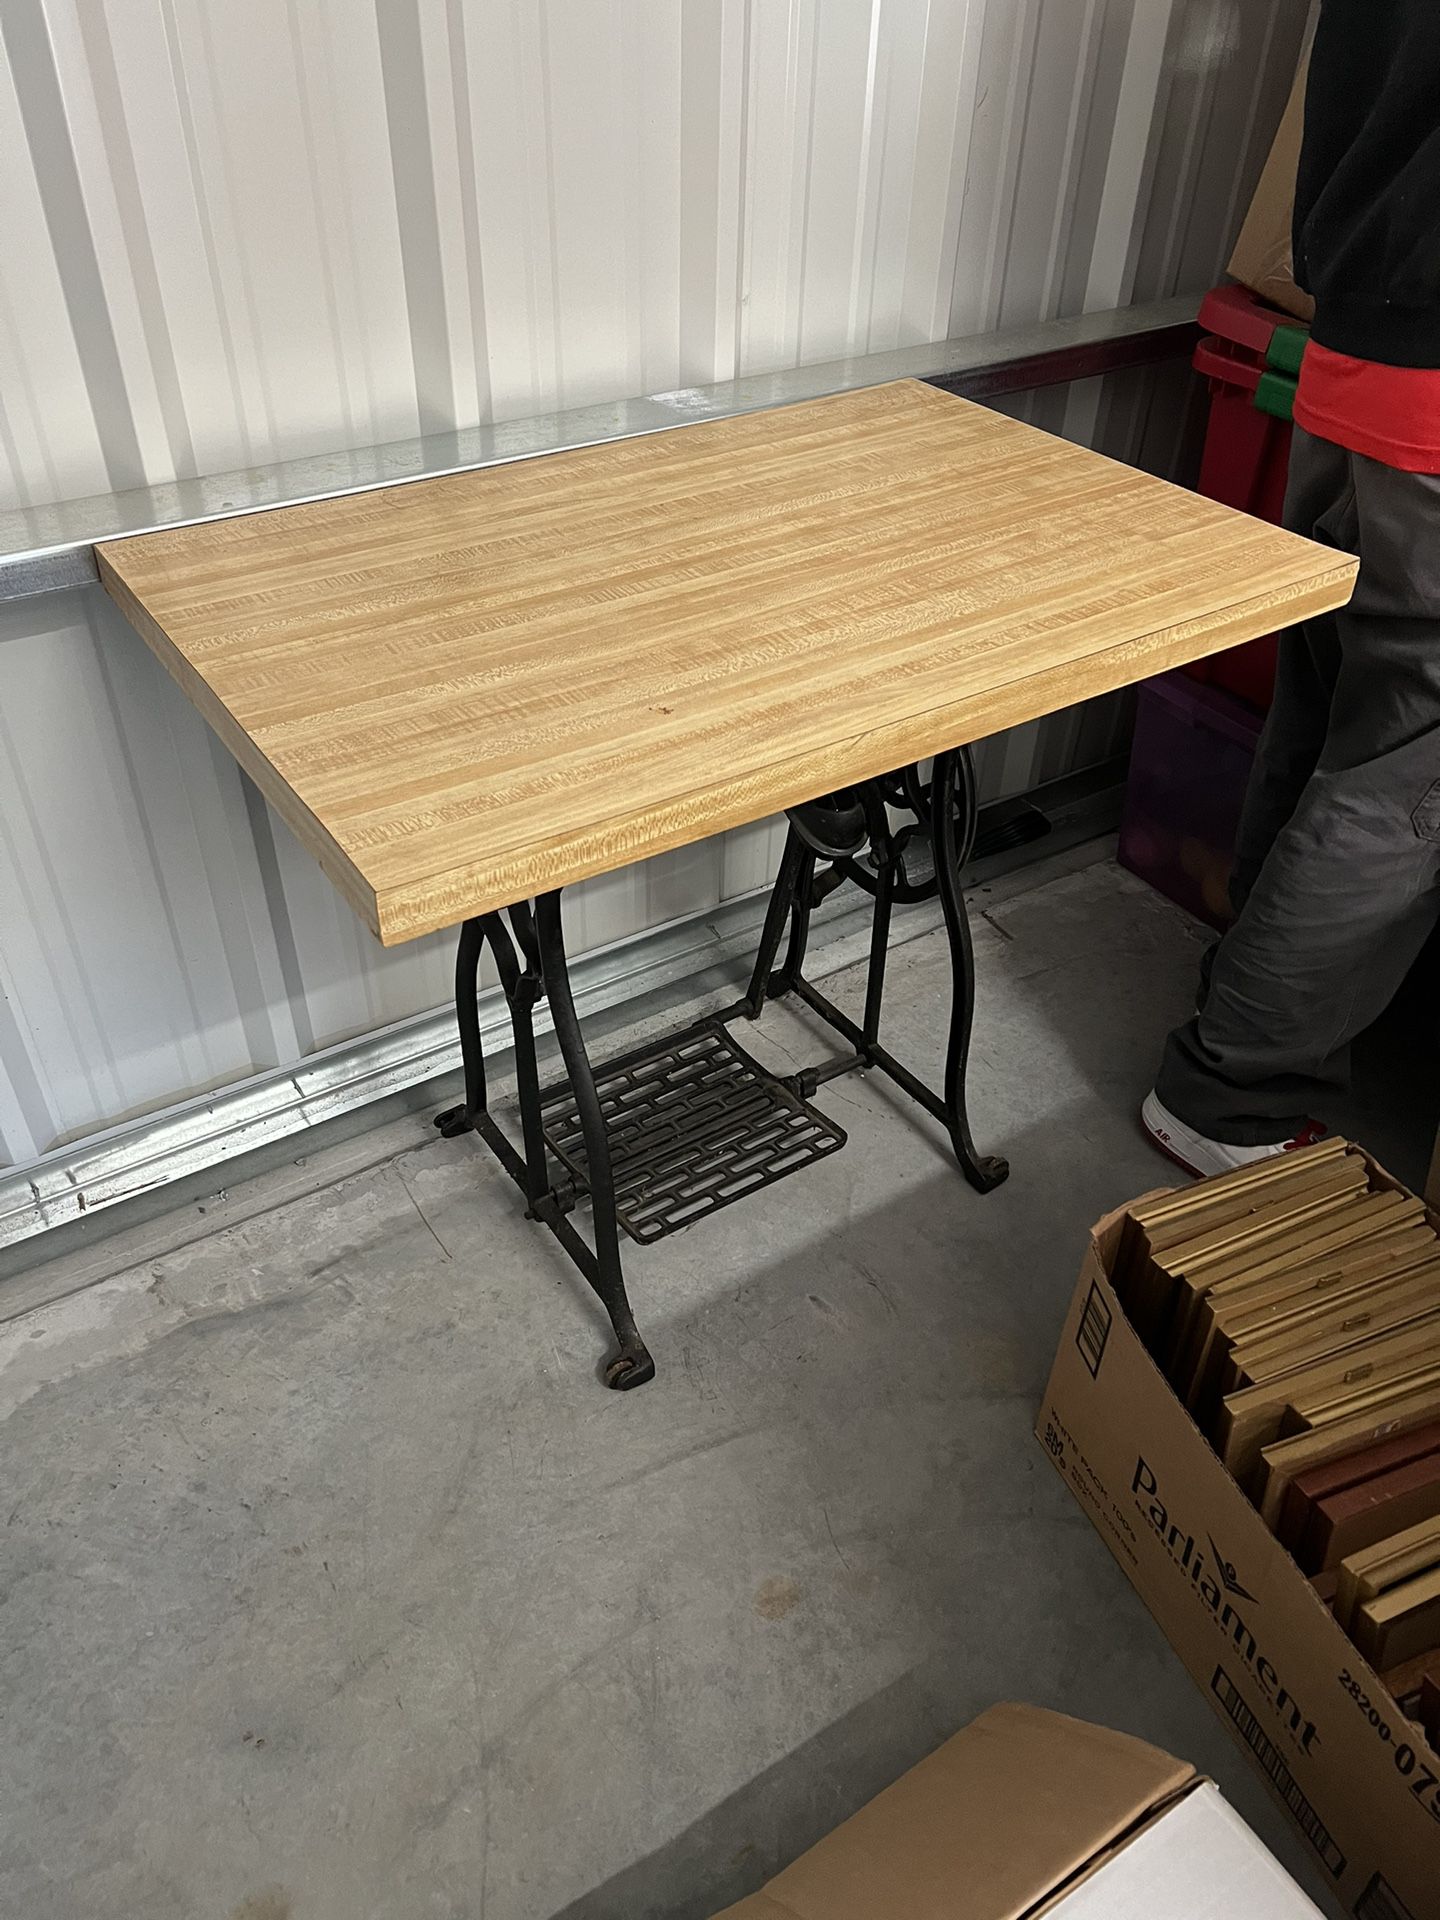 Vintage Sewing Table/ New  Updated Table Top